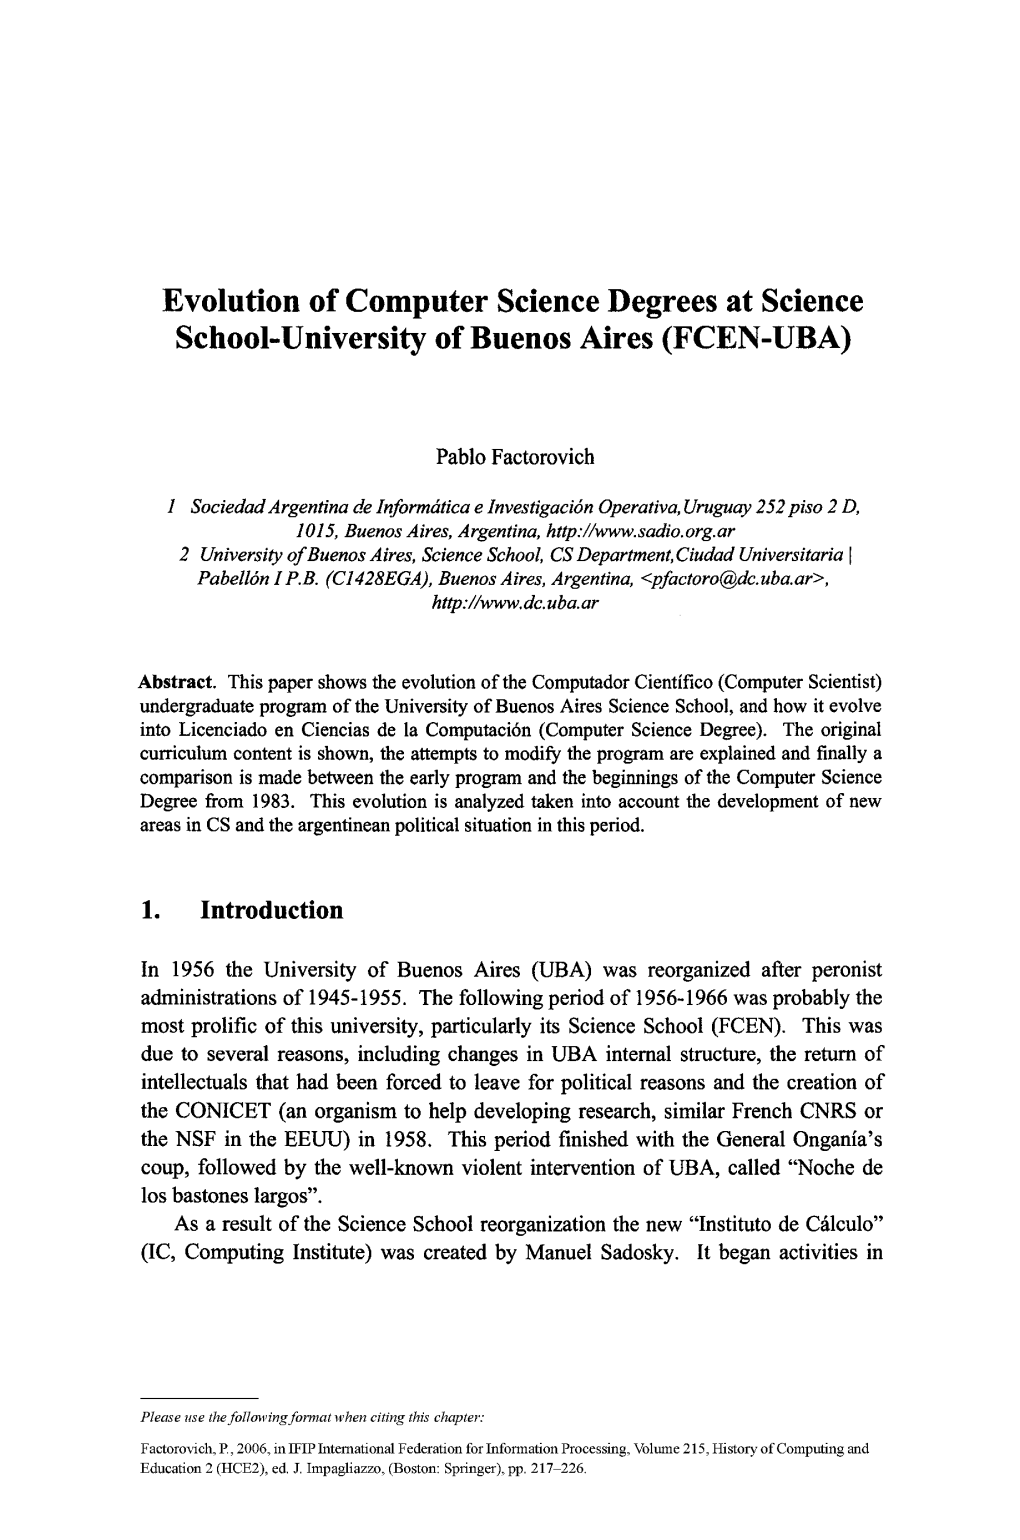 Evolution of Computer Science Degrees at Science Scliool-University of Buenos Aires (FCEN-UBA)